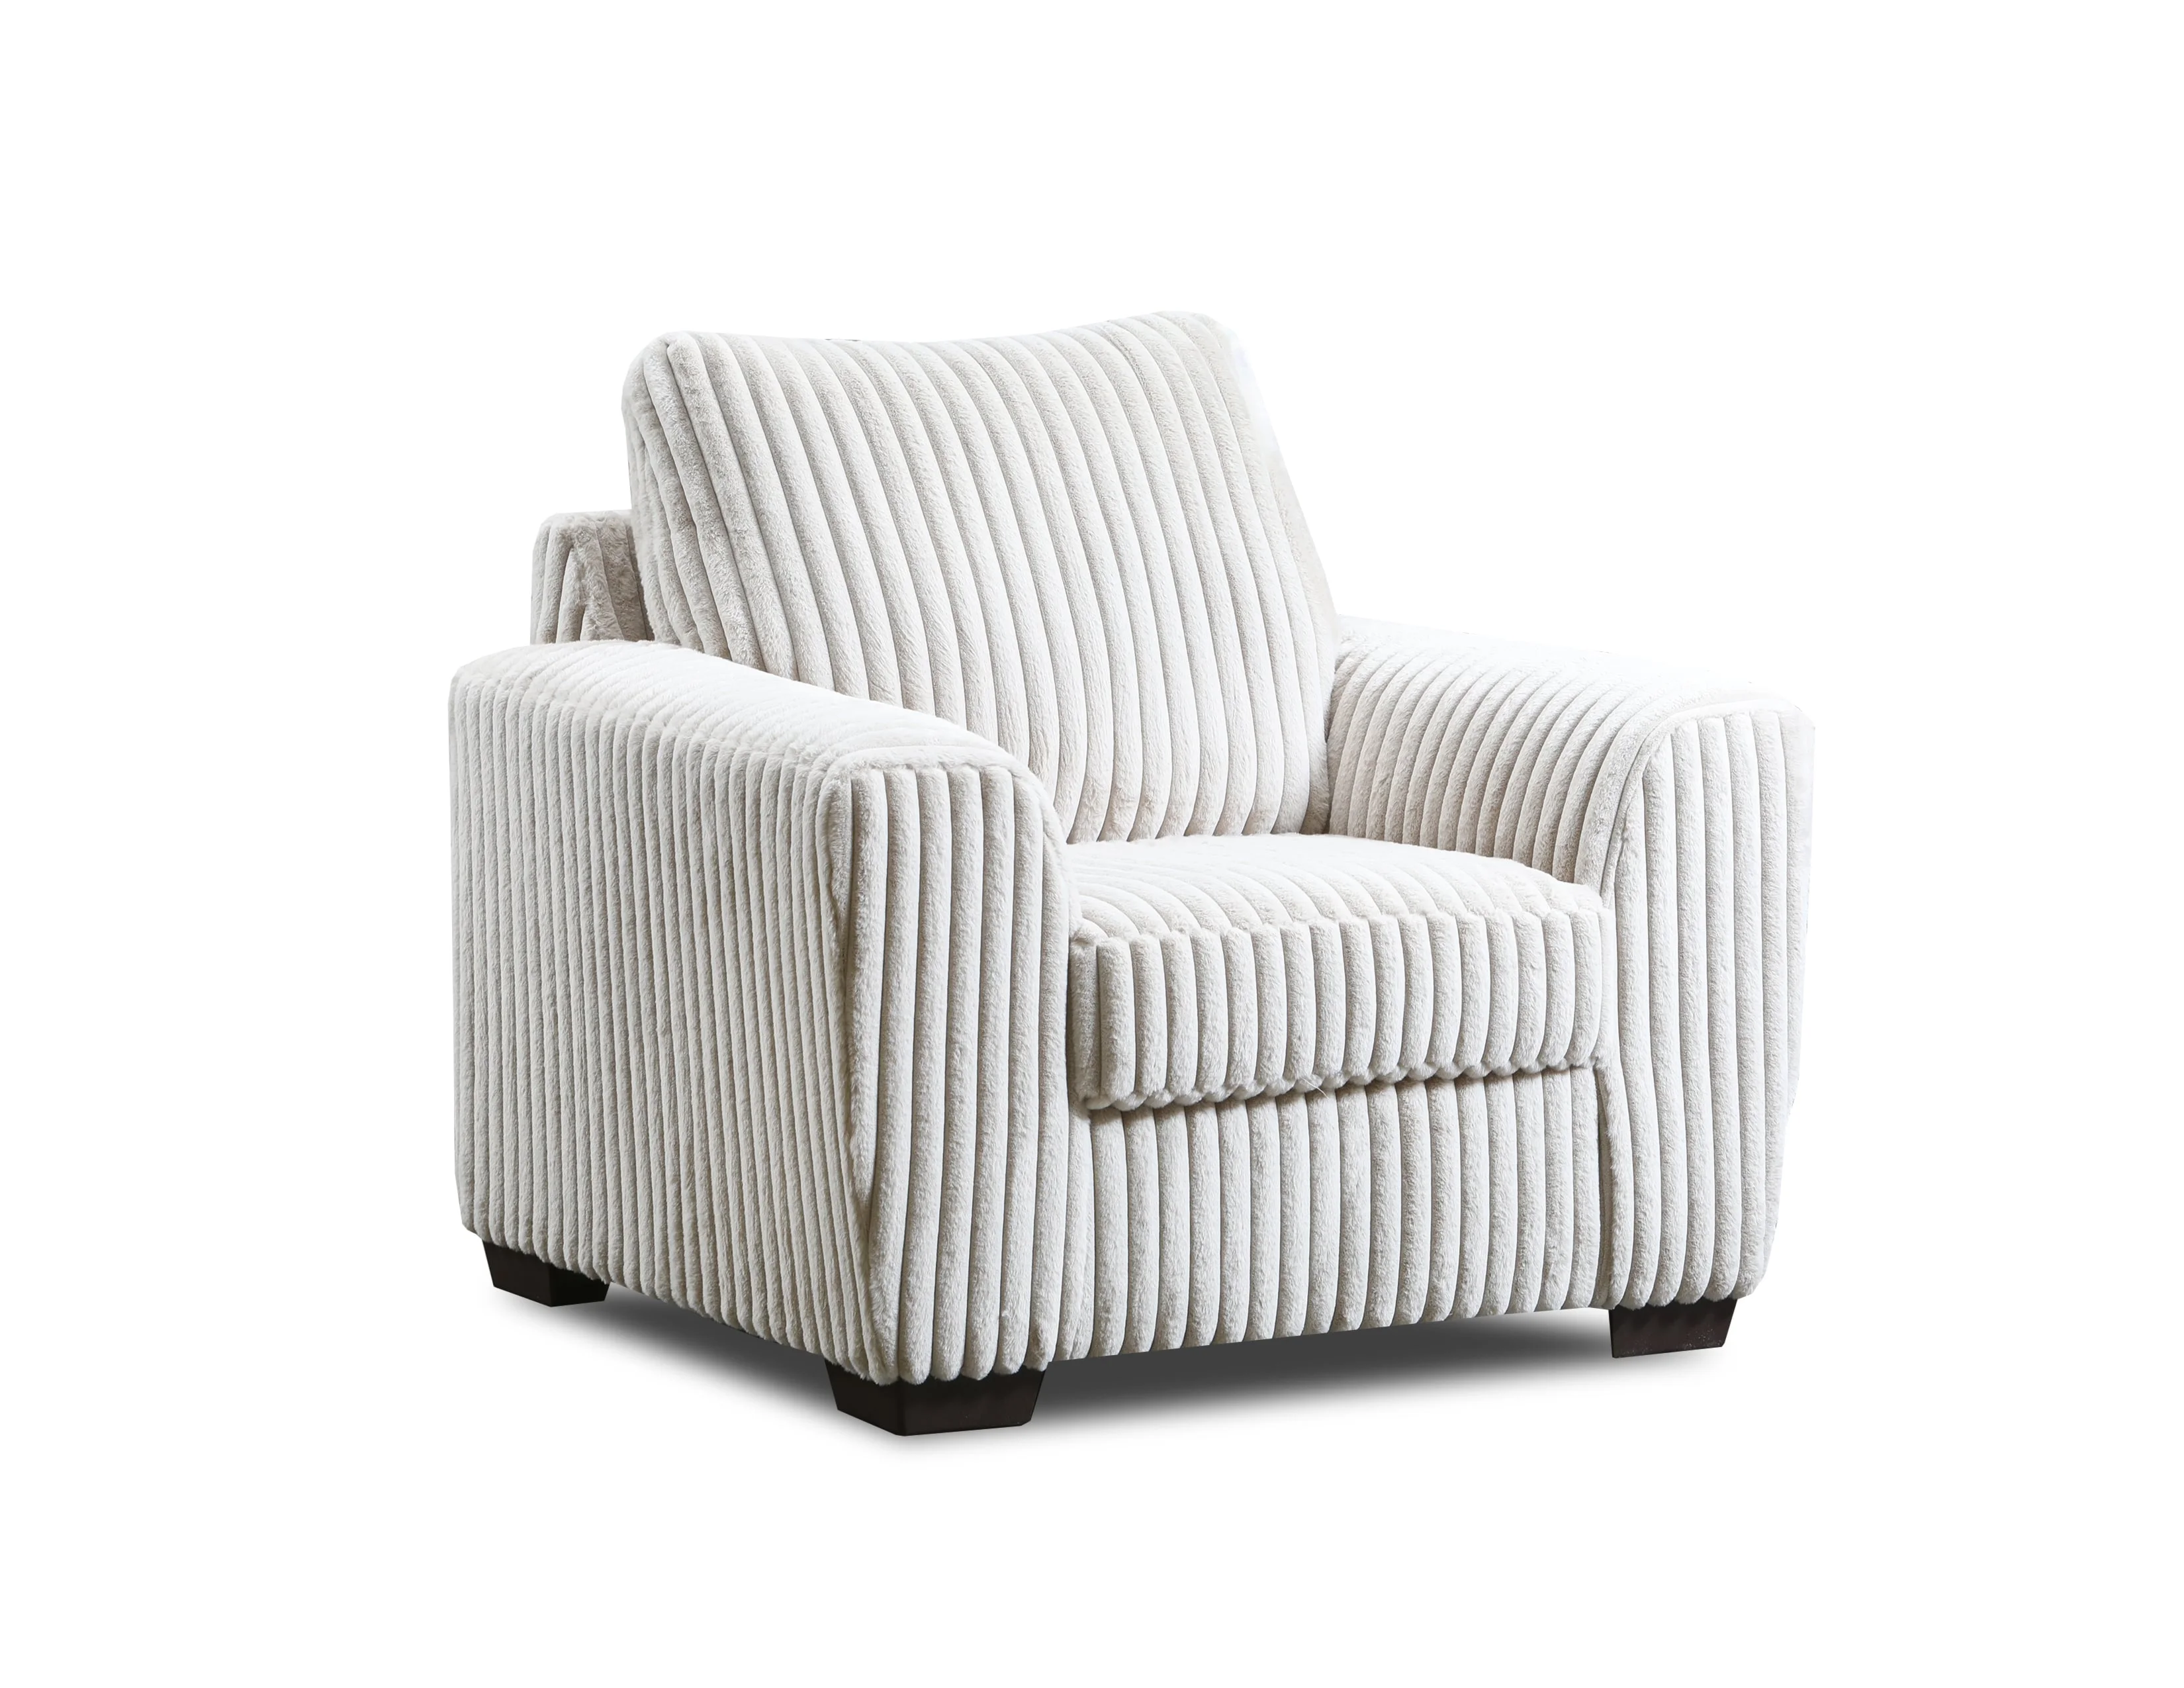 Peak Living 12503 CHAIR | Darvin Furniture | Uph - Upholstered Chairs